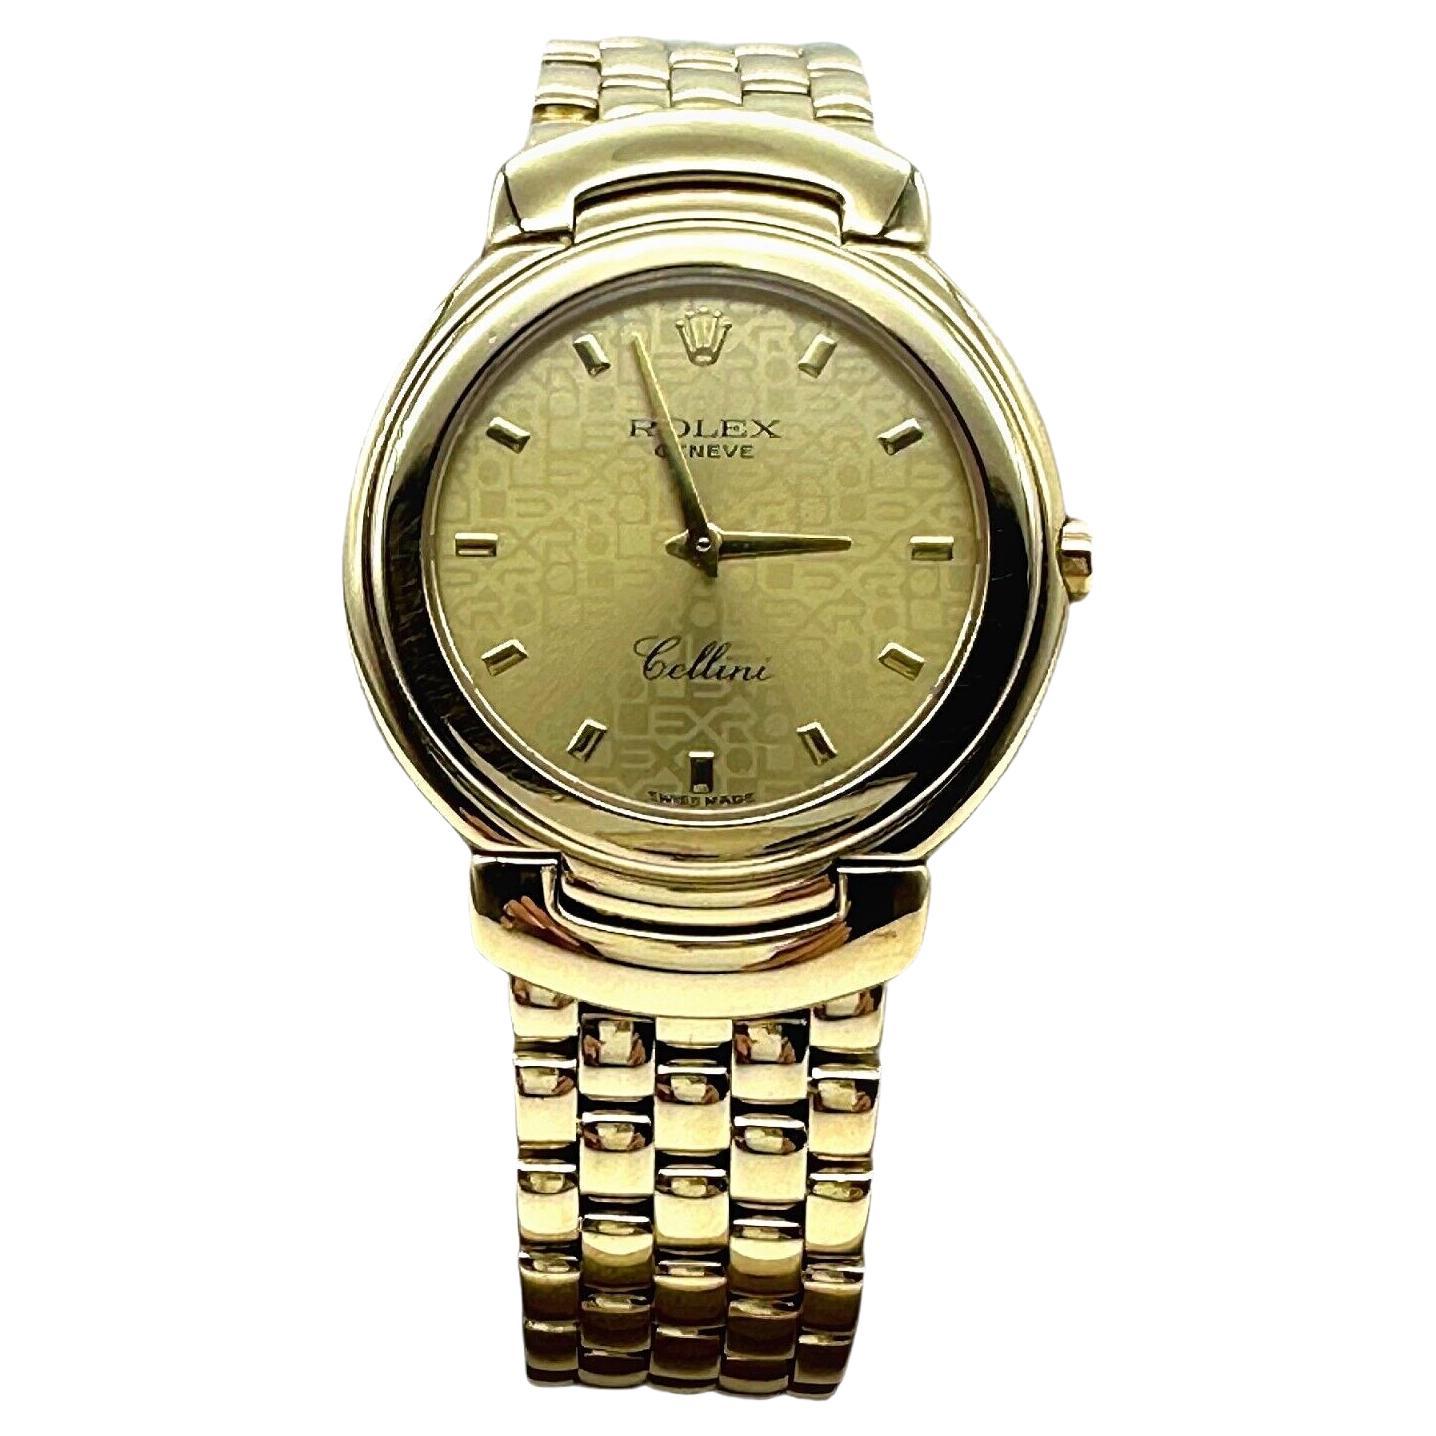 Rolex 6622 Cellini Jubilee Dial 18K Yellow Gold 33mm For Sale